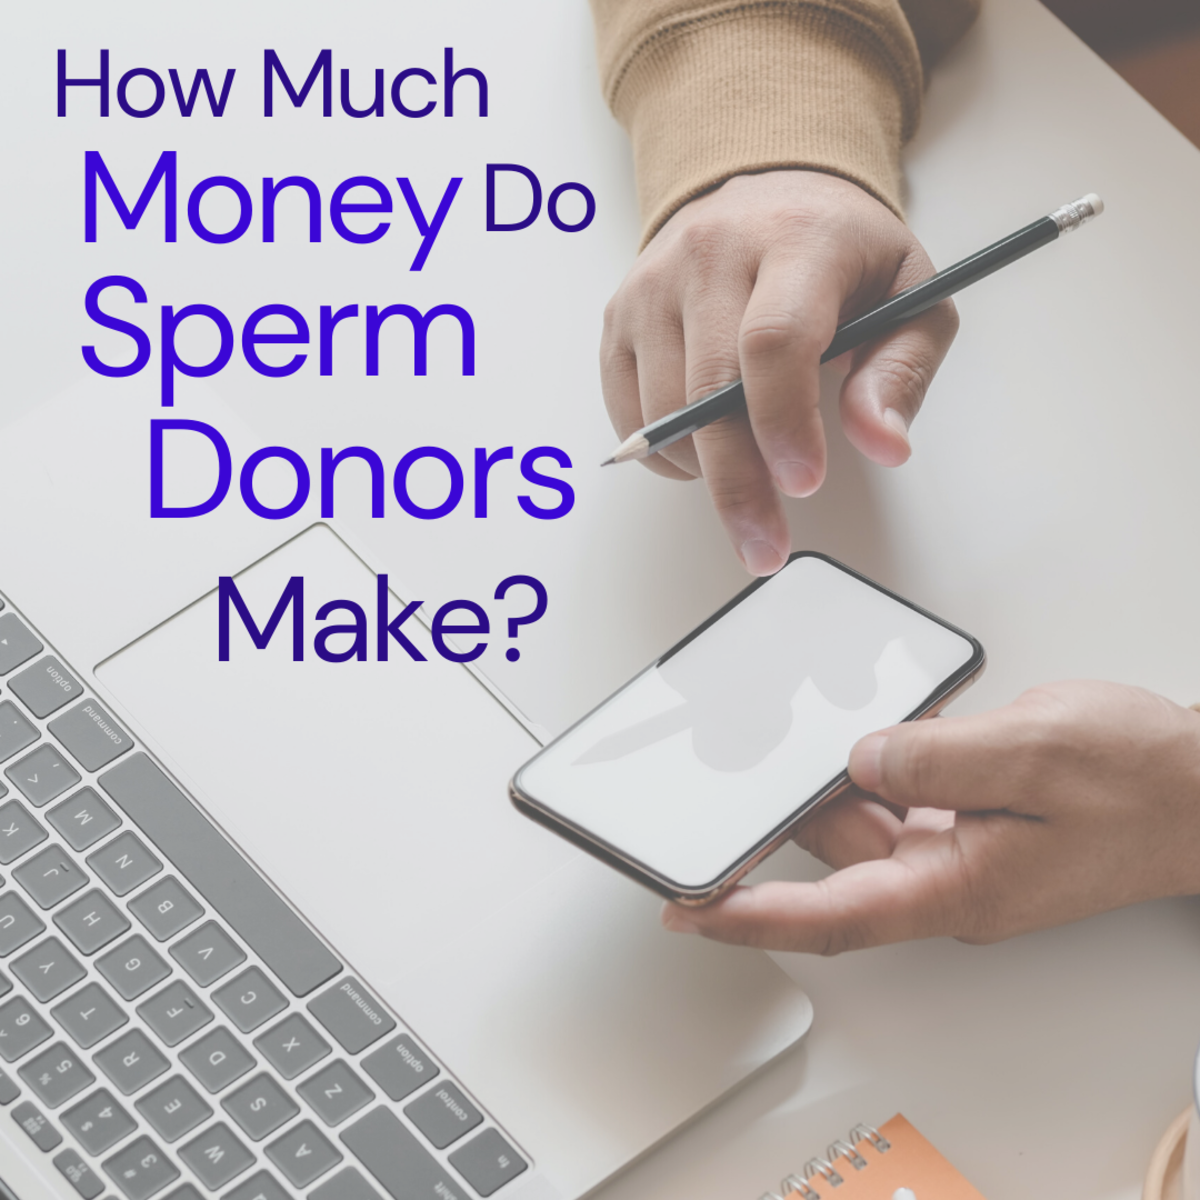 How Much Money Can You Make Donating Sperm?